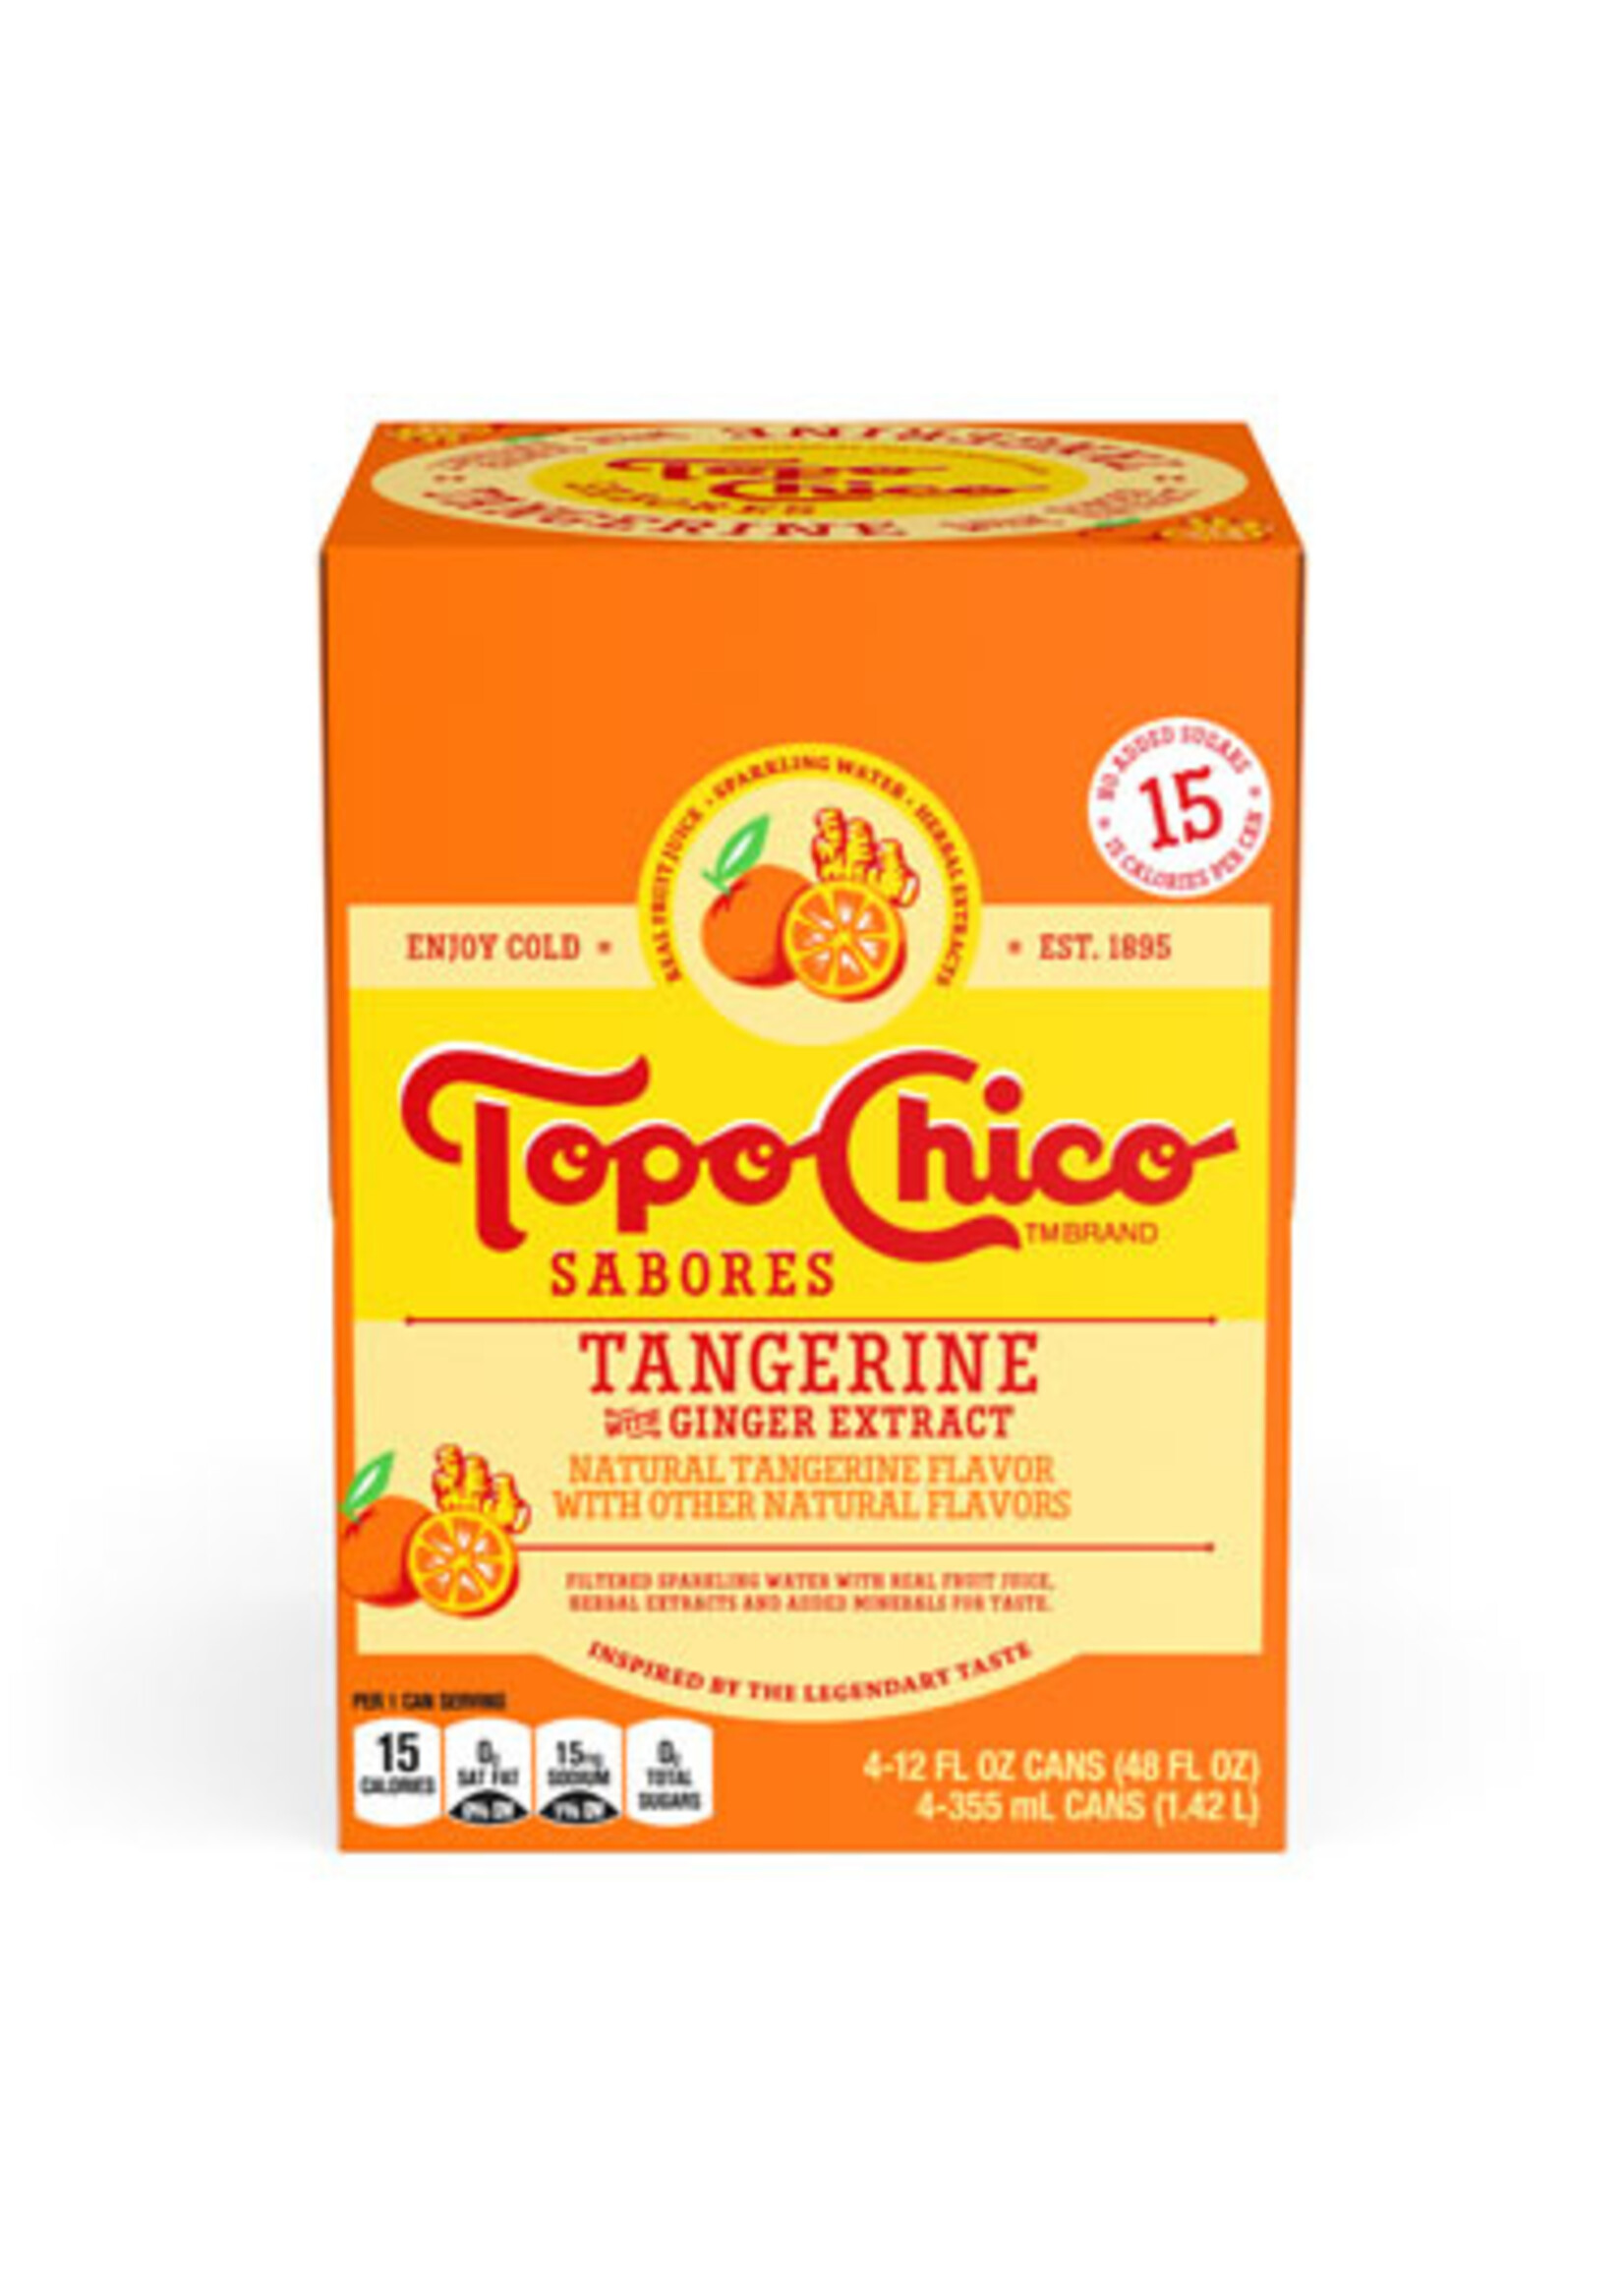 Topo Chico Sabores Tangerine with Ginger Extract 4pk 12oz Cans